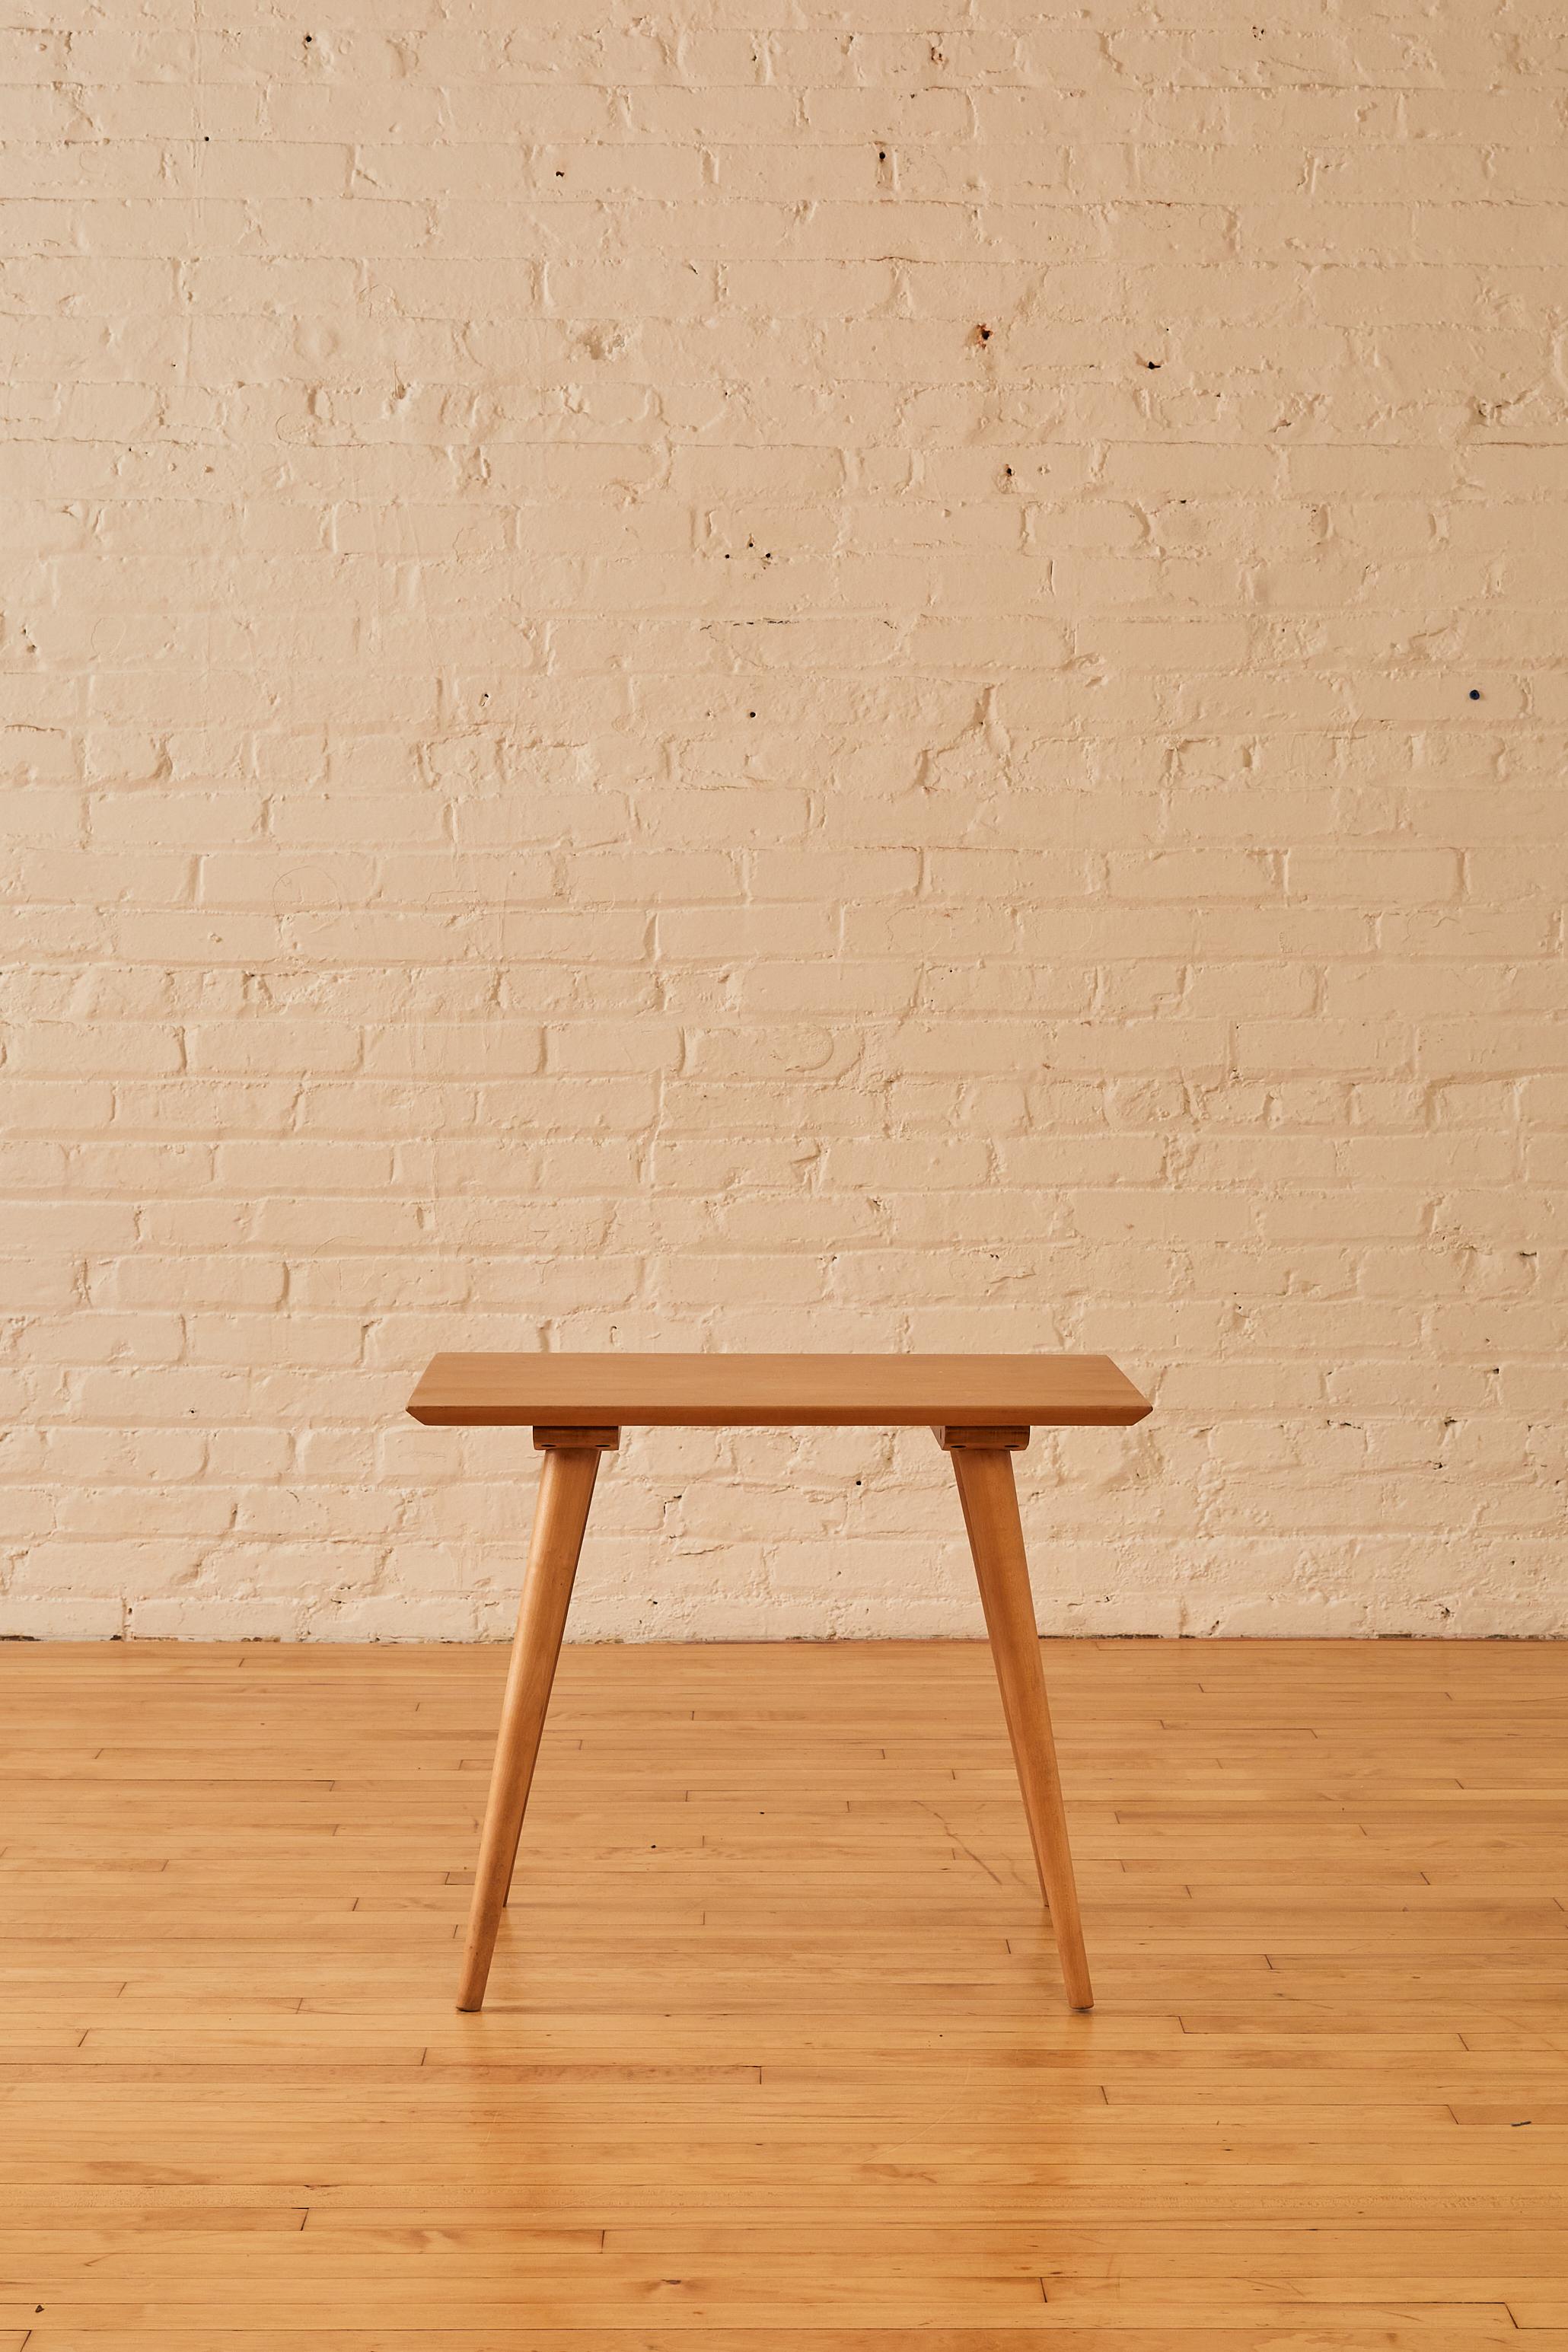 Maple Side Table by Paul McCobb for Planner Group with tapered legs.

